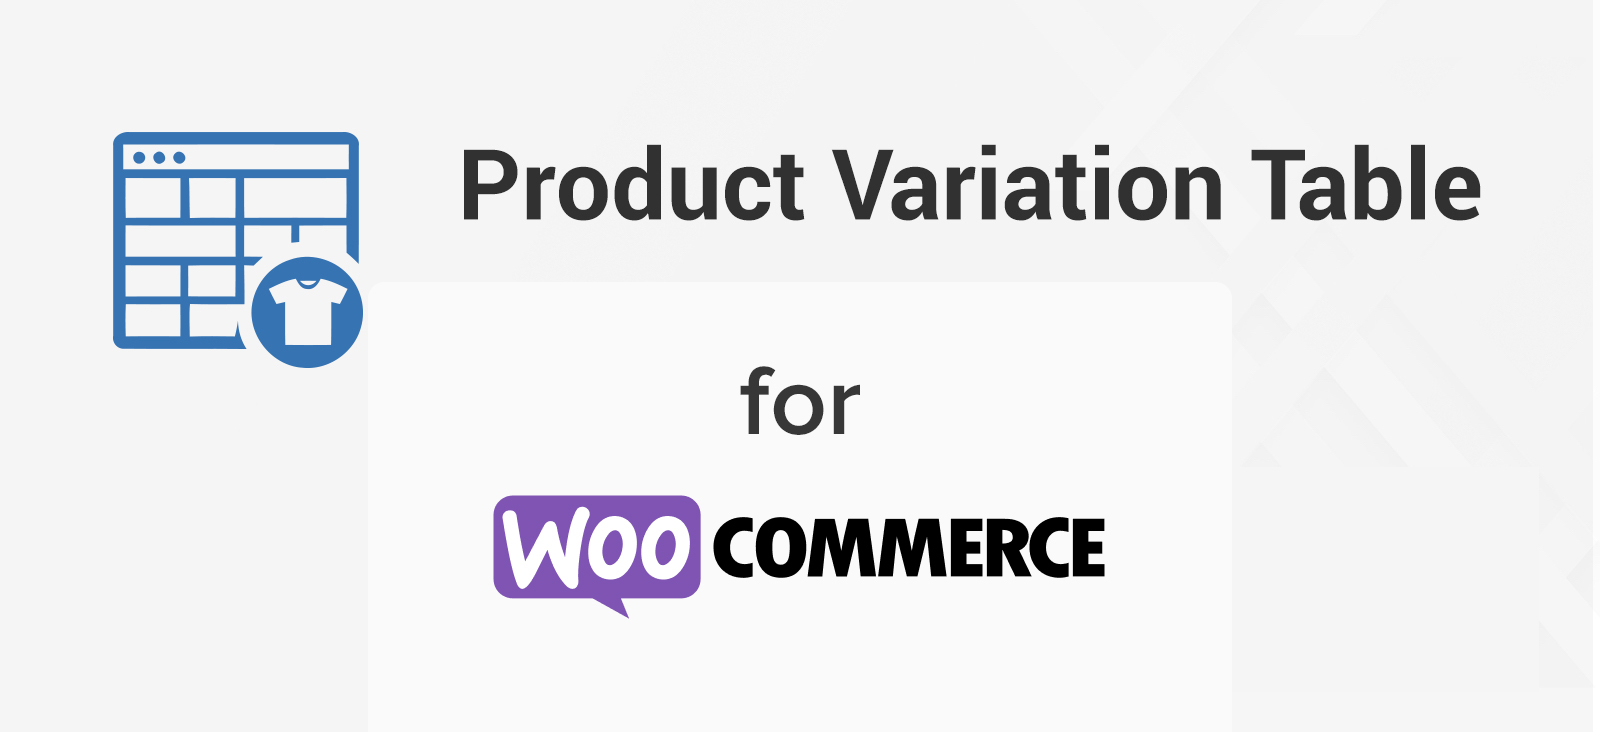 Display product variations in a data table using the Product Variations Table for WooCommerce plugin to help users quickly find their desired product.